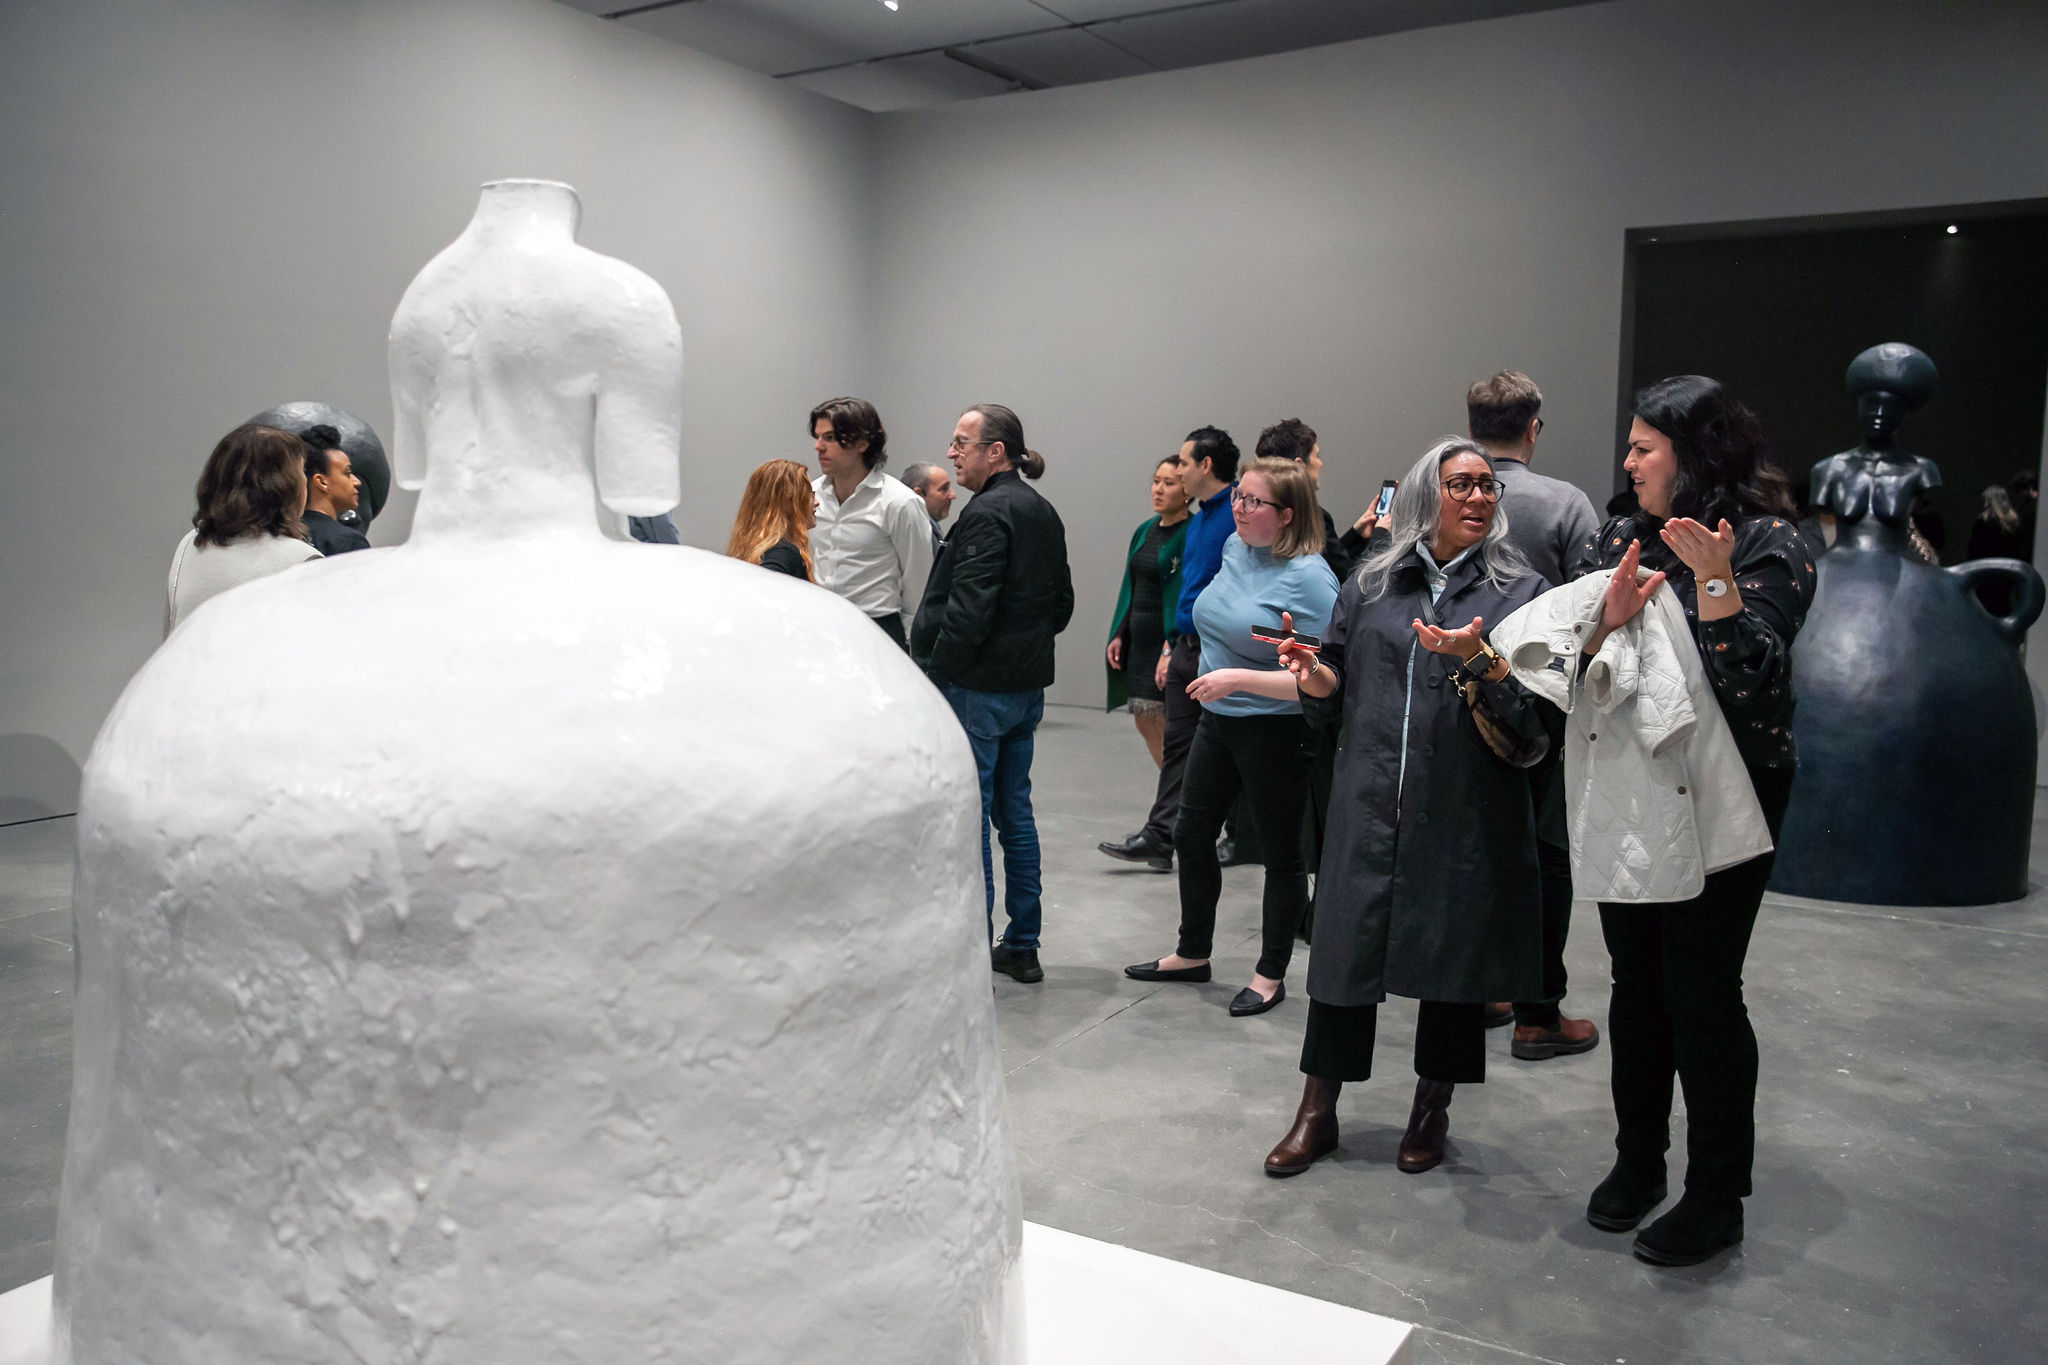 A group of people look and talk about a large white ceramic sculpture